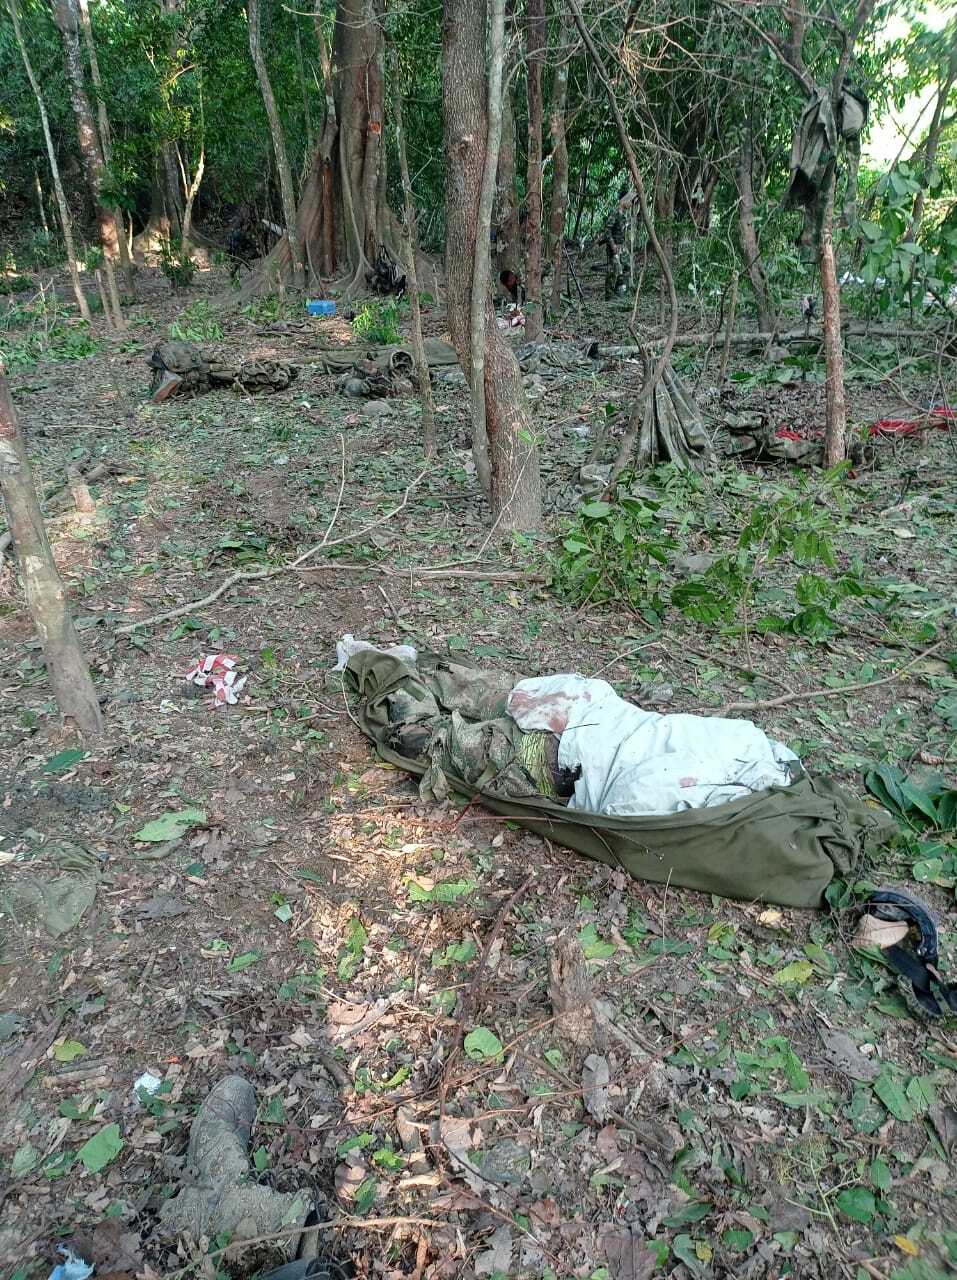 Ambush of Colombian soldiers by the "ELN"